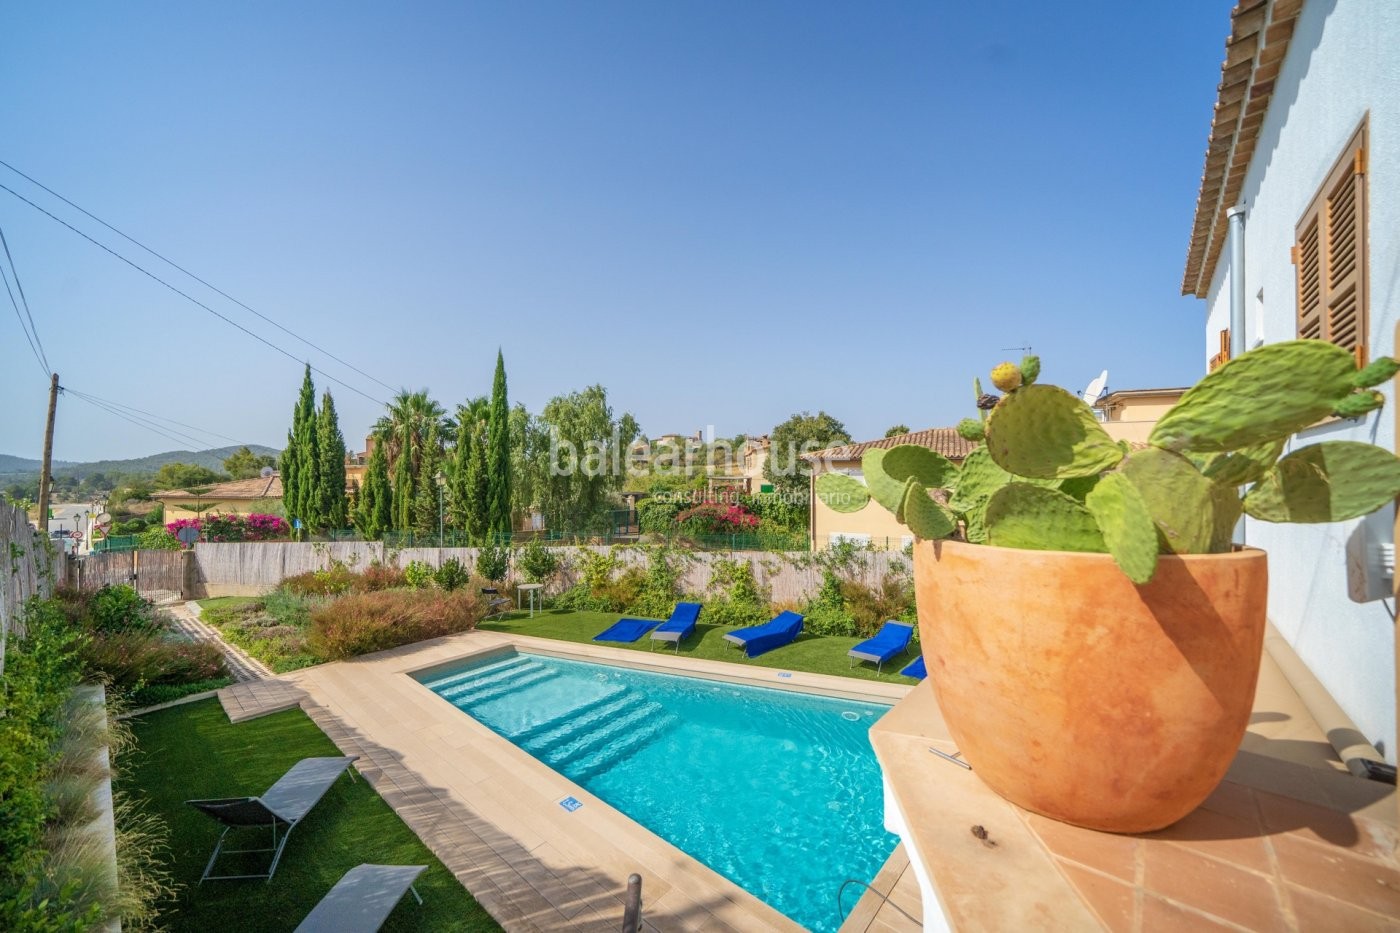 Bright villa with pool and Holiday Renta License in the beautiful town of Calvia